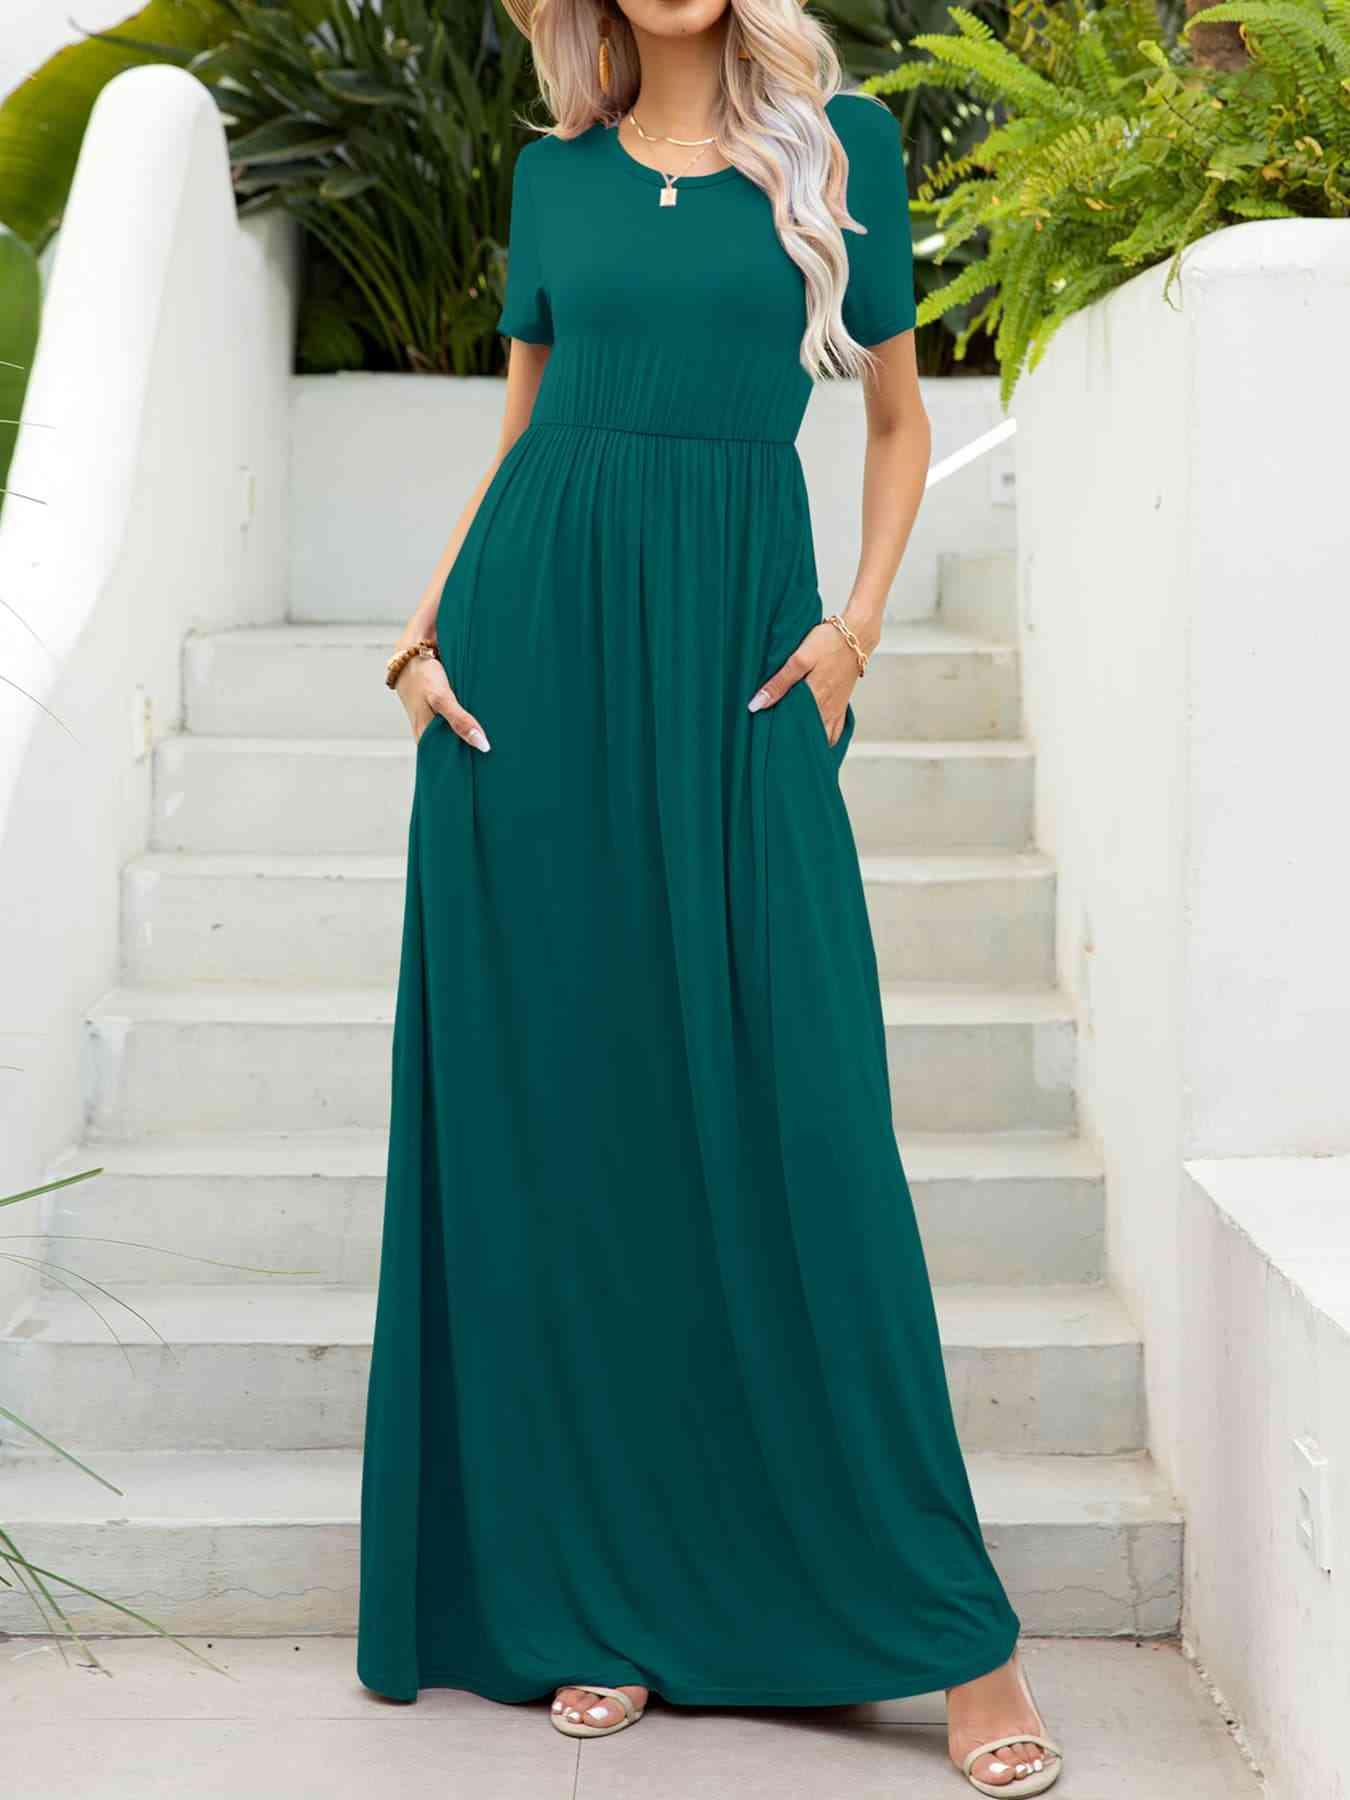 a woman wearing a green dress standing in front of stairs